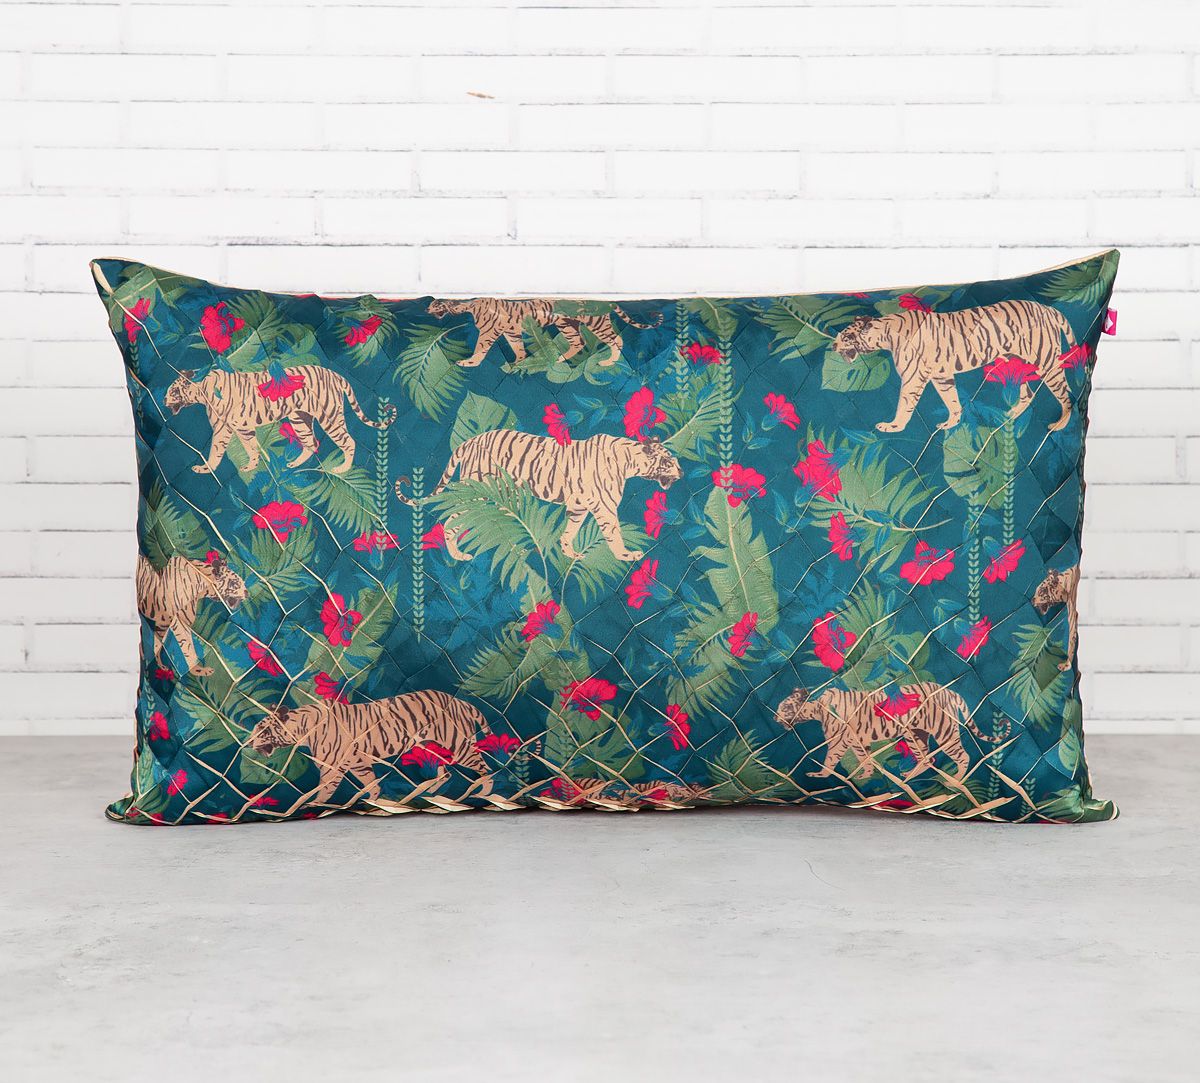 India Circus Tropical Tiger Decorative Scale Cushion Cover